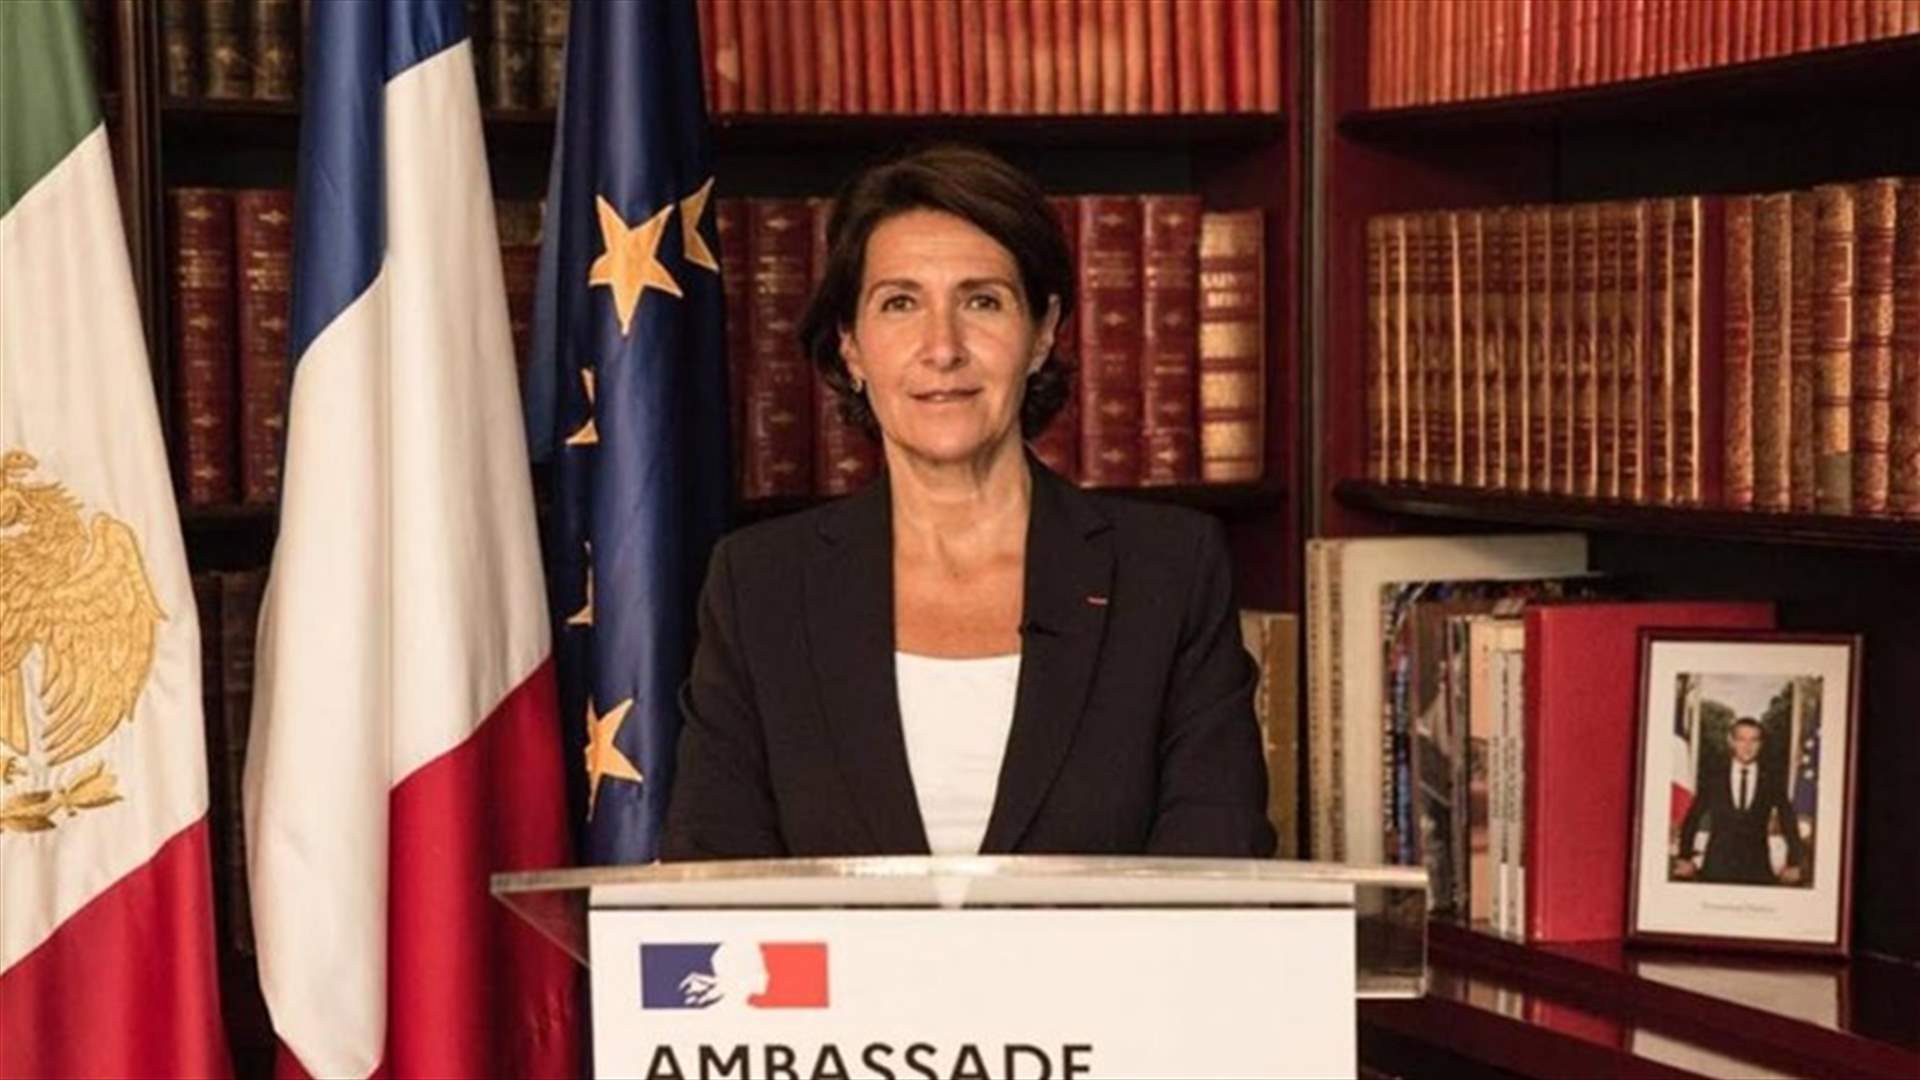 French Ambassador: In order to mourn, Lebanese need justice to be served